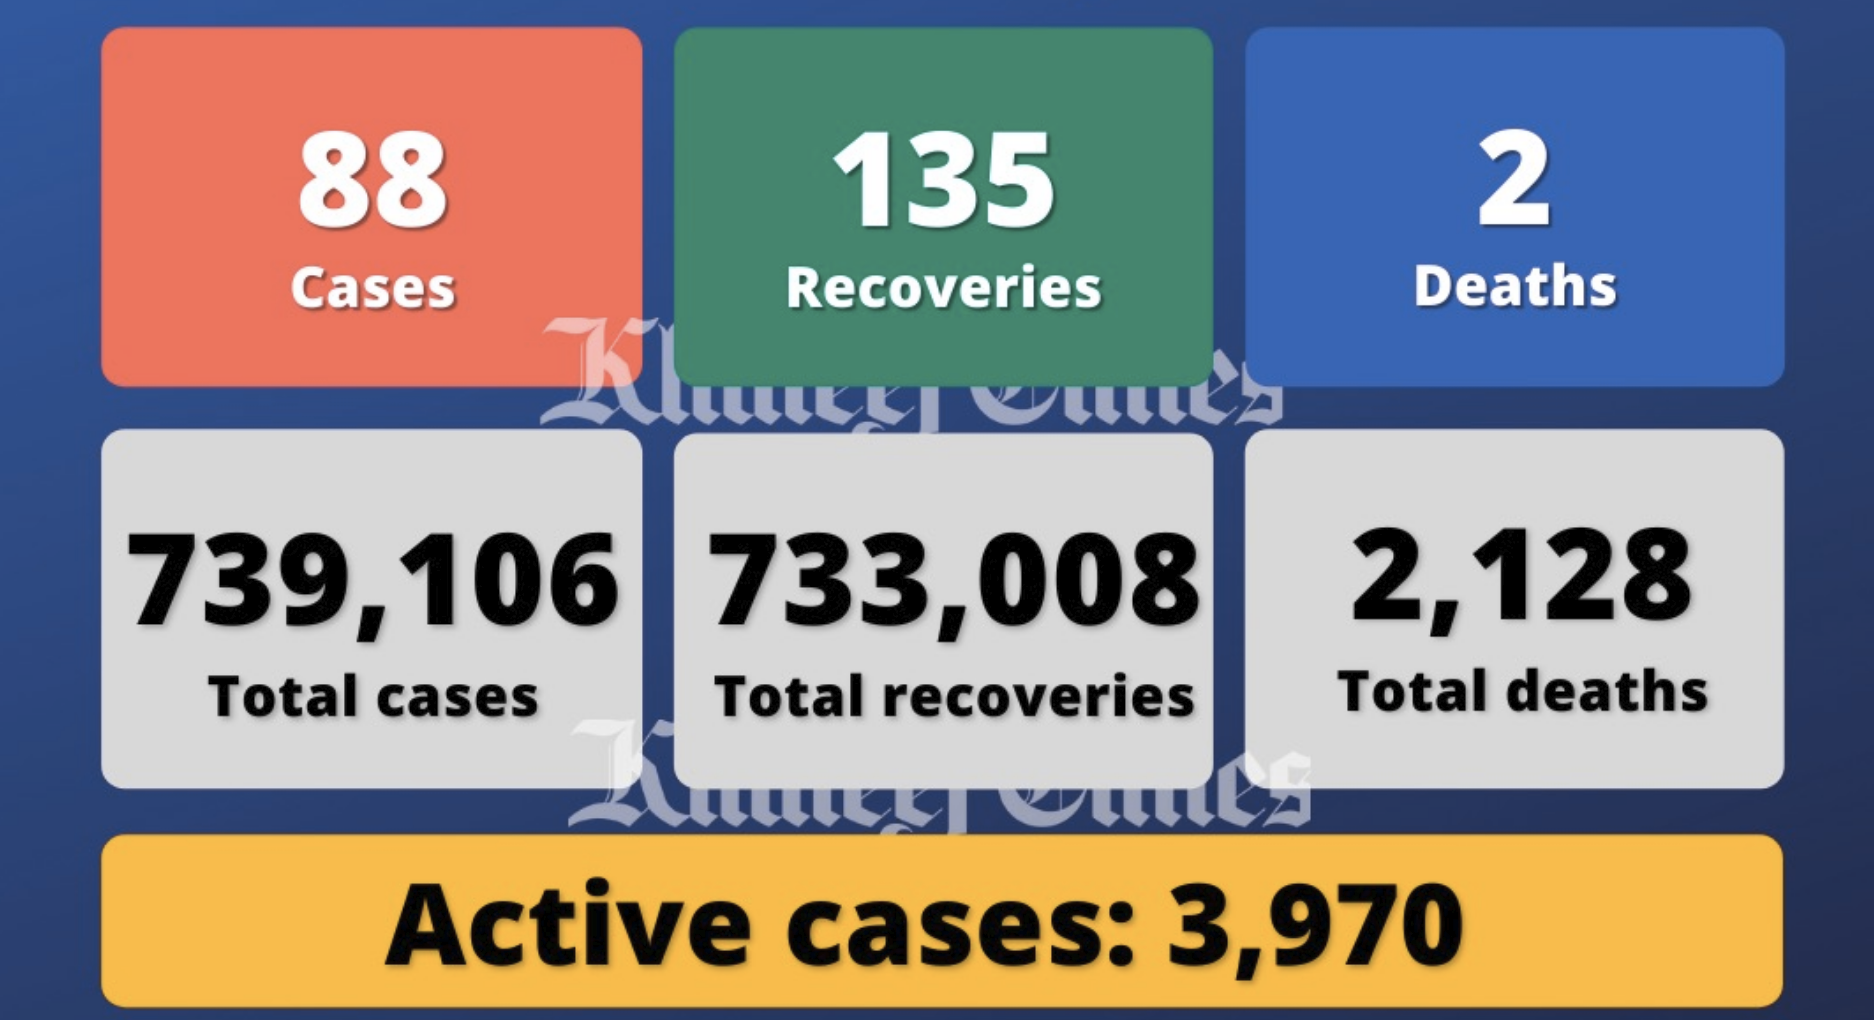 UAE reports 88 Covid-19 cases, 135 recoveries, 2 deaths